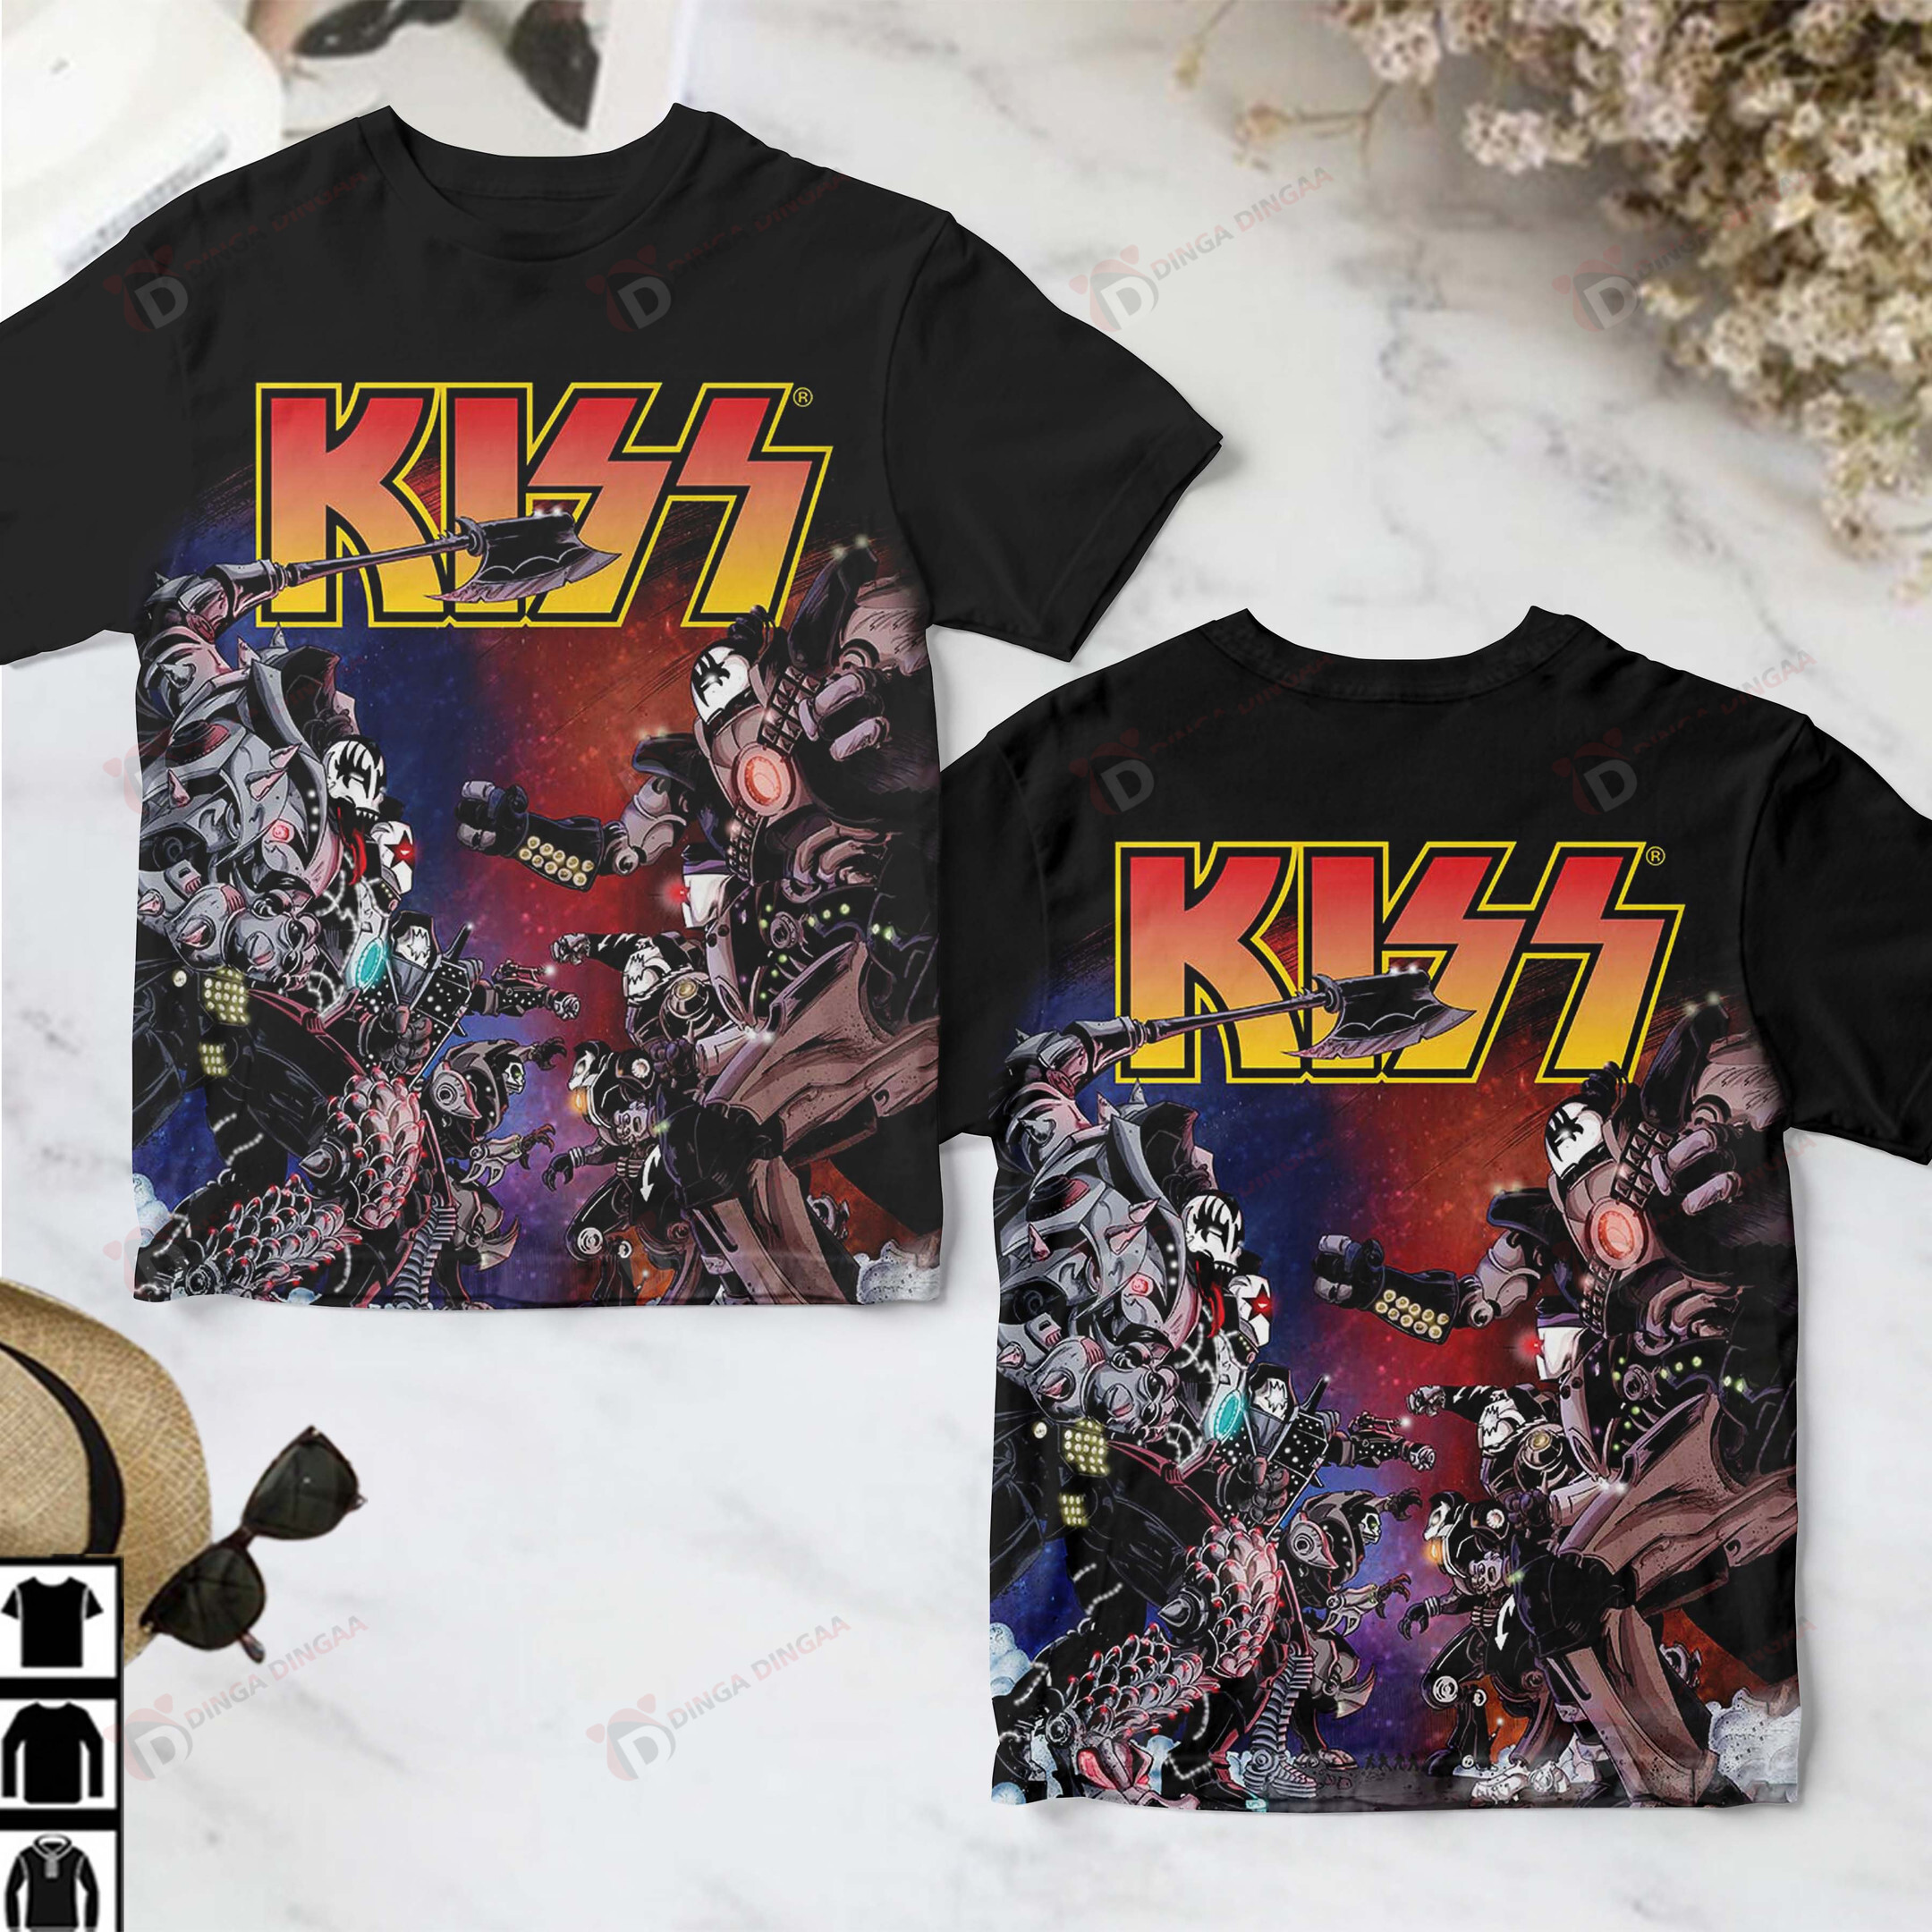 Let's take a look at these hot T-Shirt 17